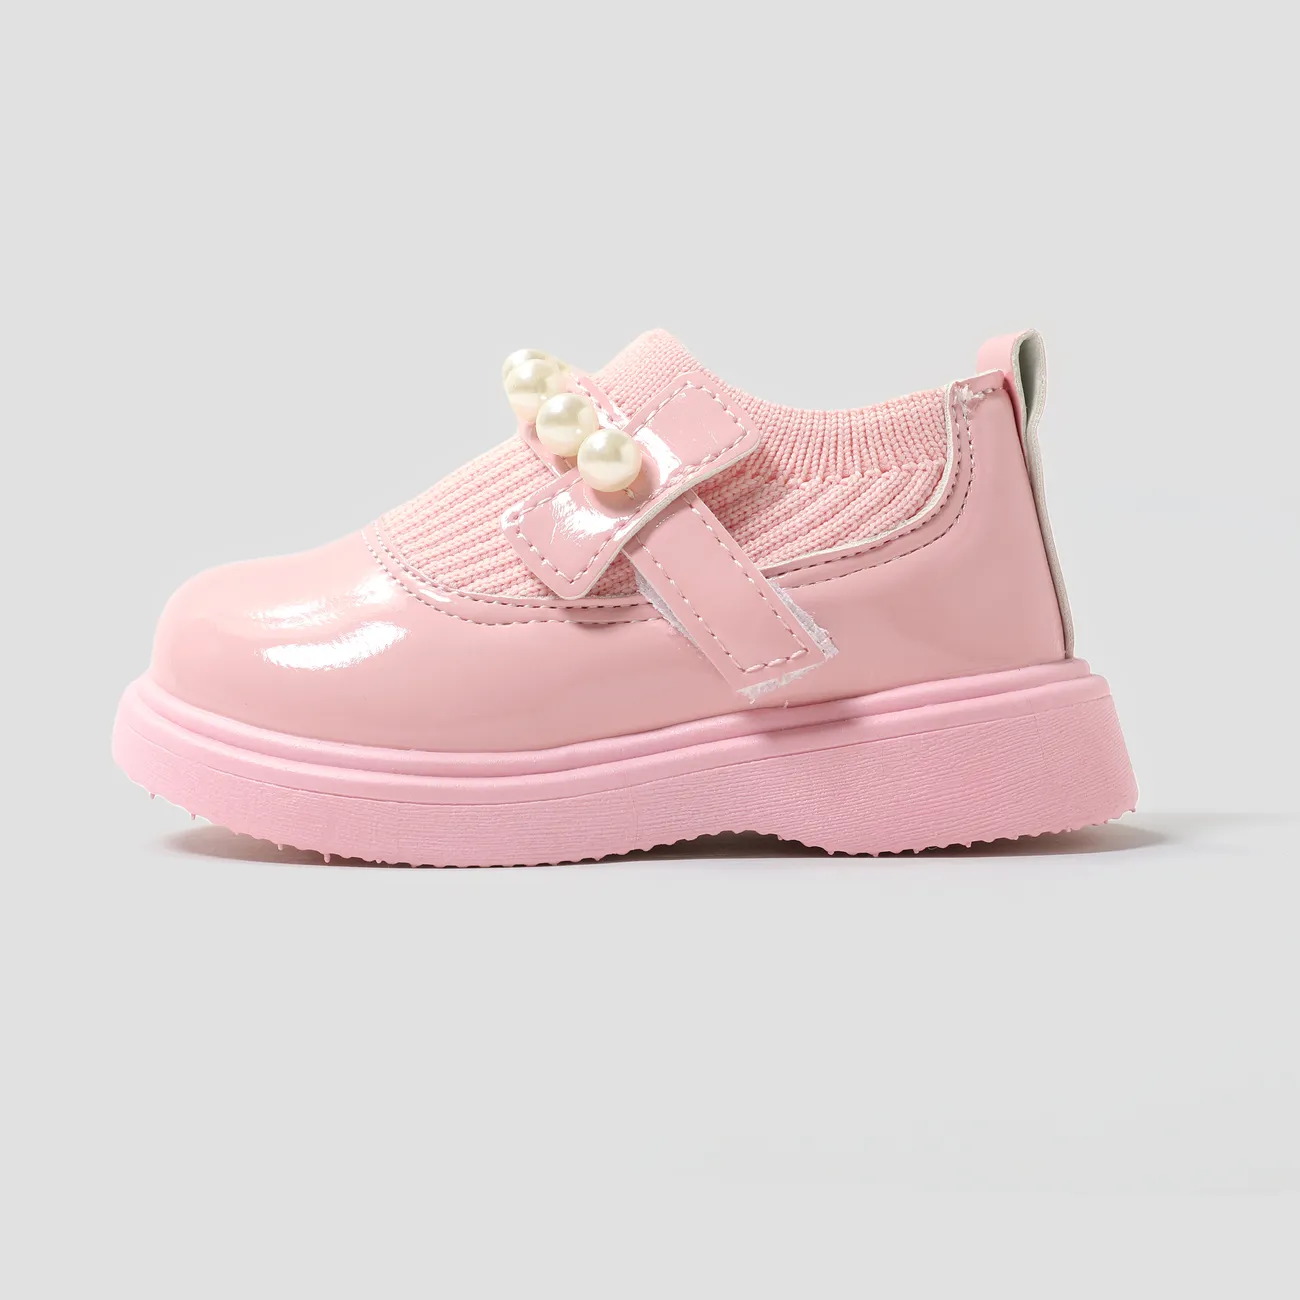 Toddler/Kids Girl Casual Velcro Pearl Leather Shoes Pink big image 1